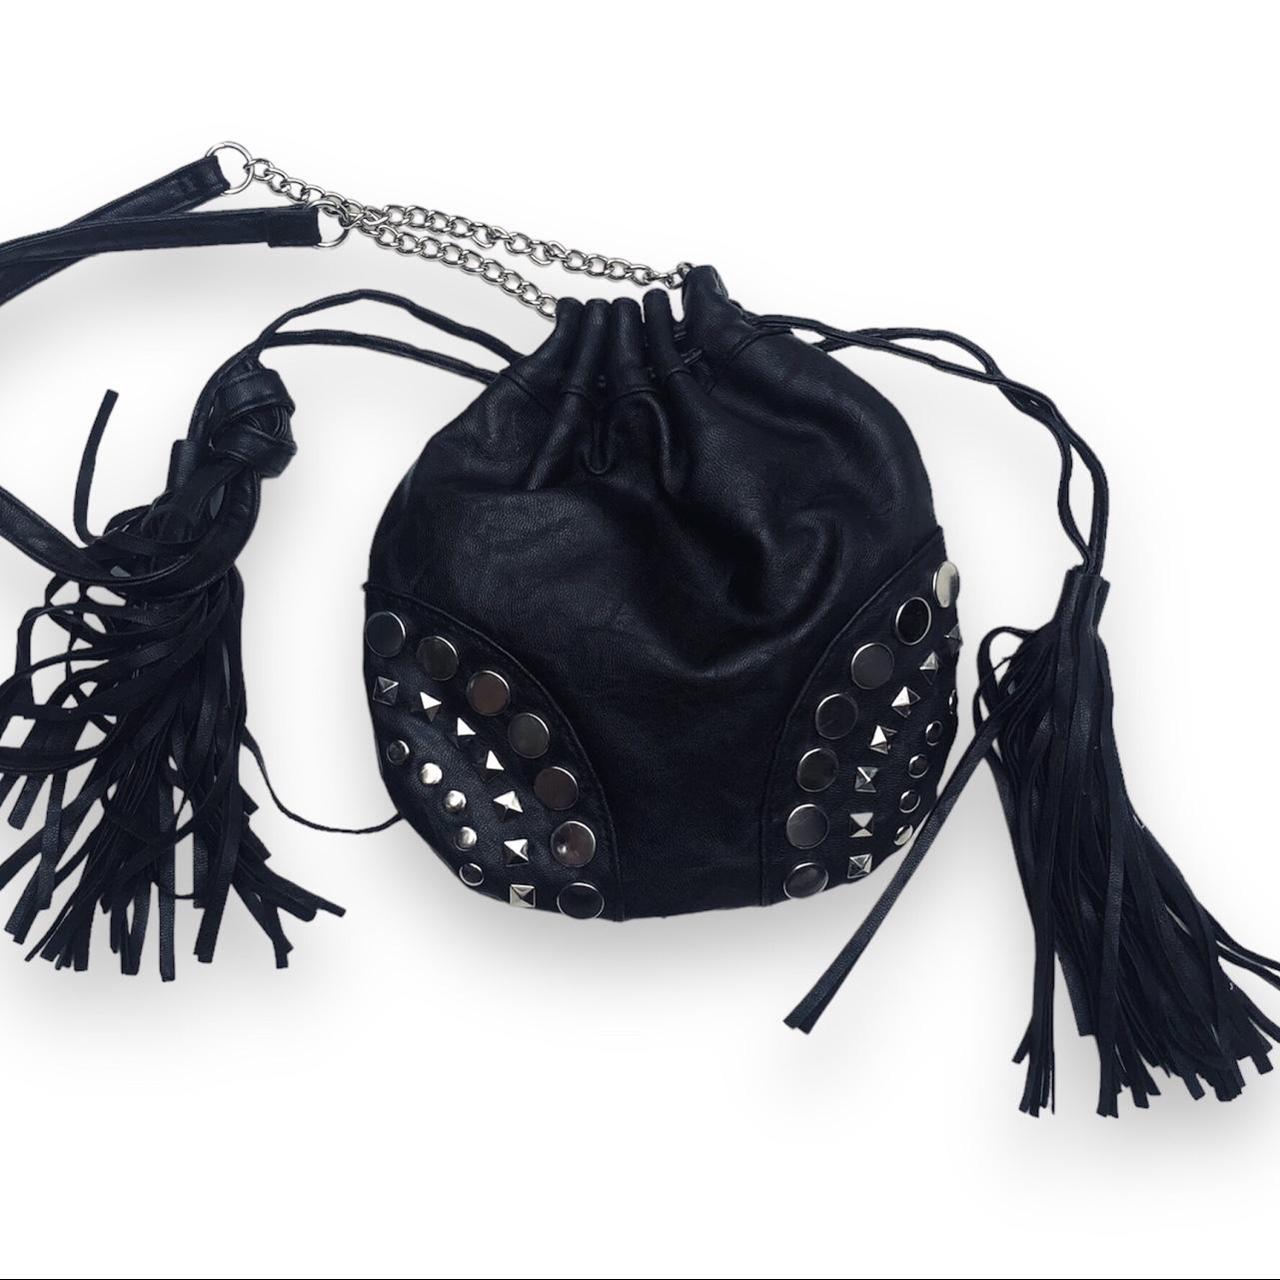 Black, vegan-leather, crossbody purse with tassels. By Isabelle | eBay